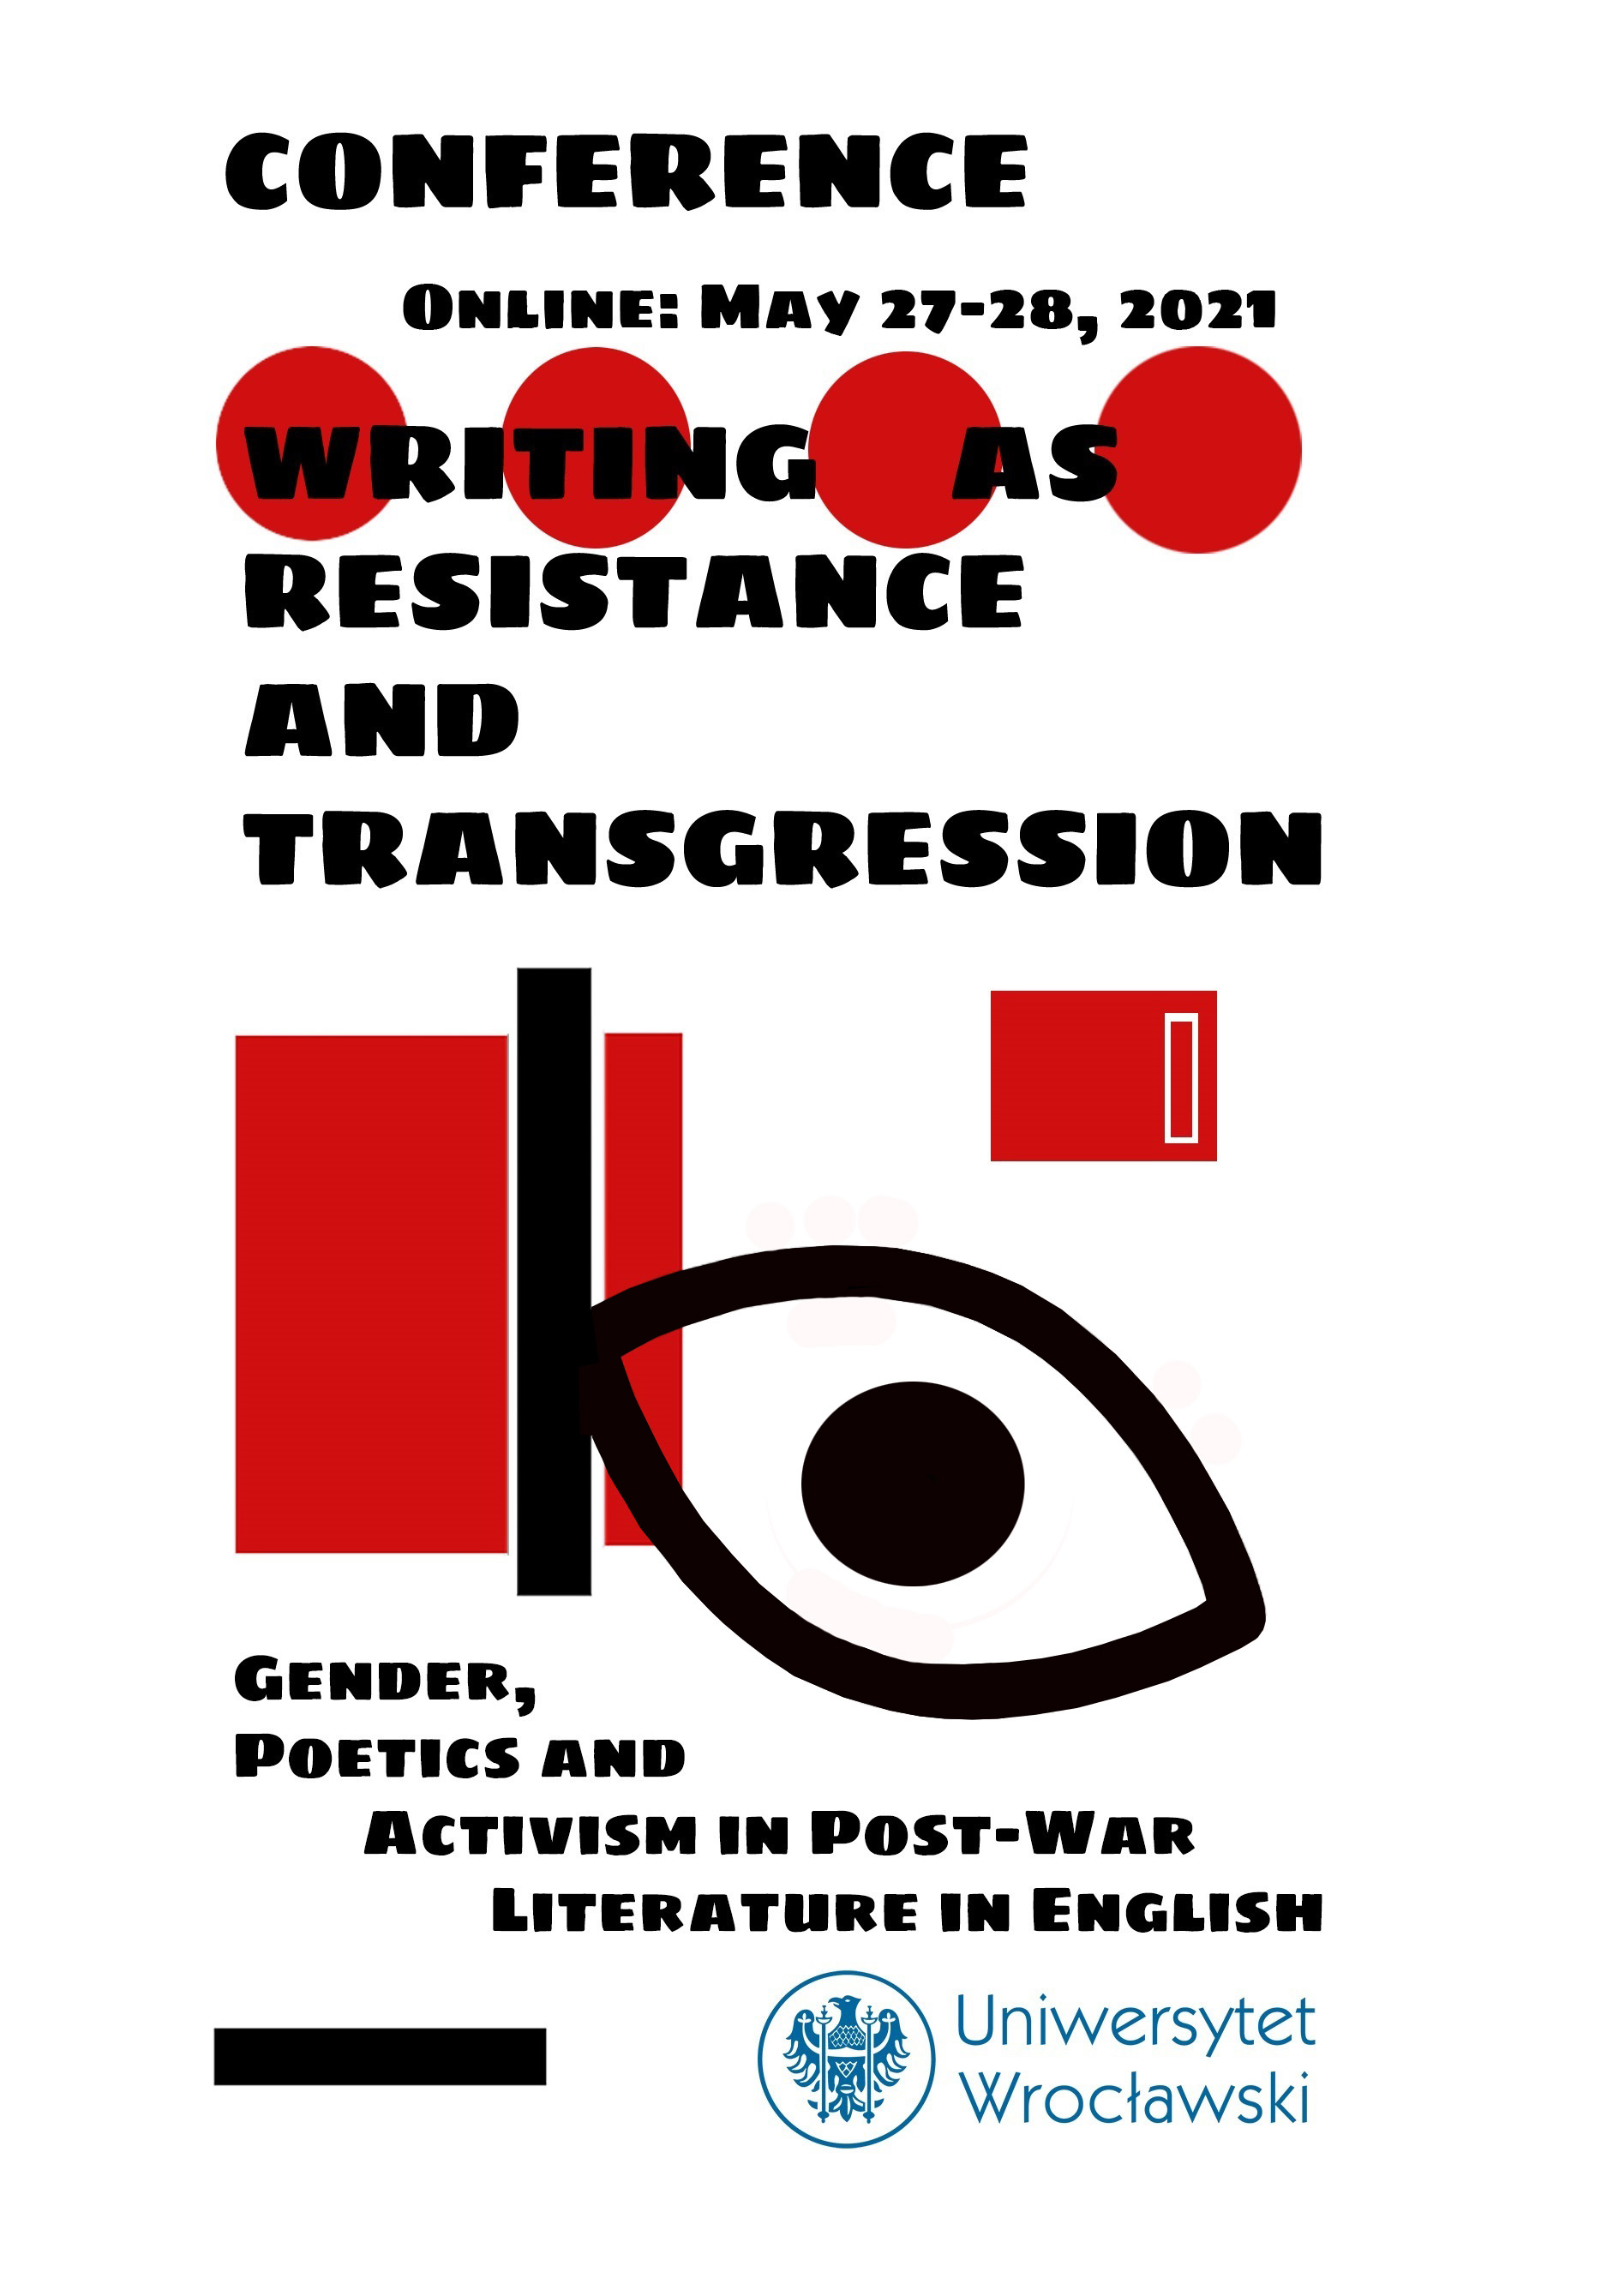 Annexe post-531209-Poster_WritingAsResistance_UWr_IFA_Conference.jpg